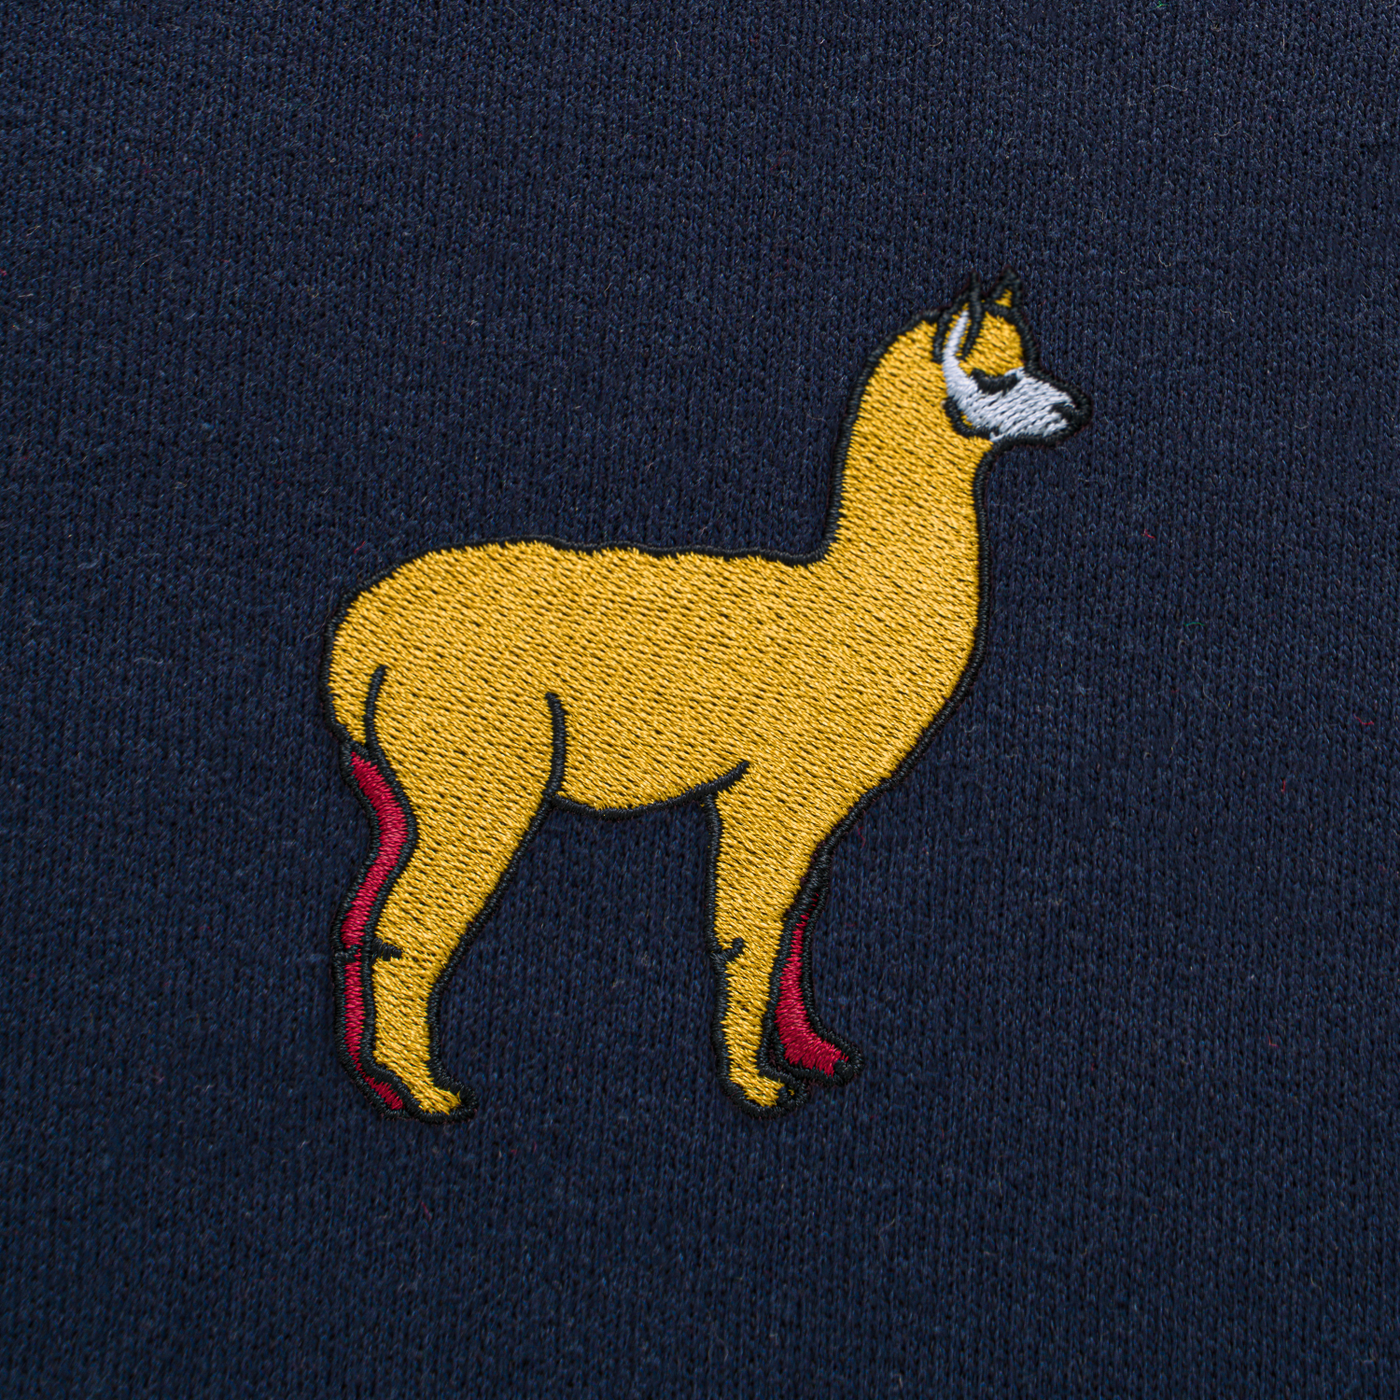 Bobby's Planet Men's Embroidered Alpaca Sweatshirt from South American Amazon Animals Collection in Navy Color#color_navy